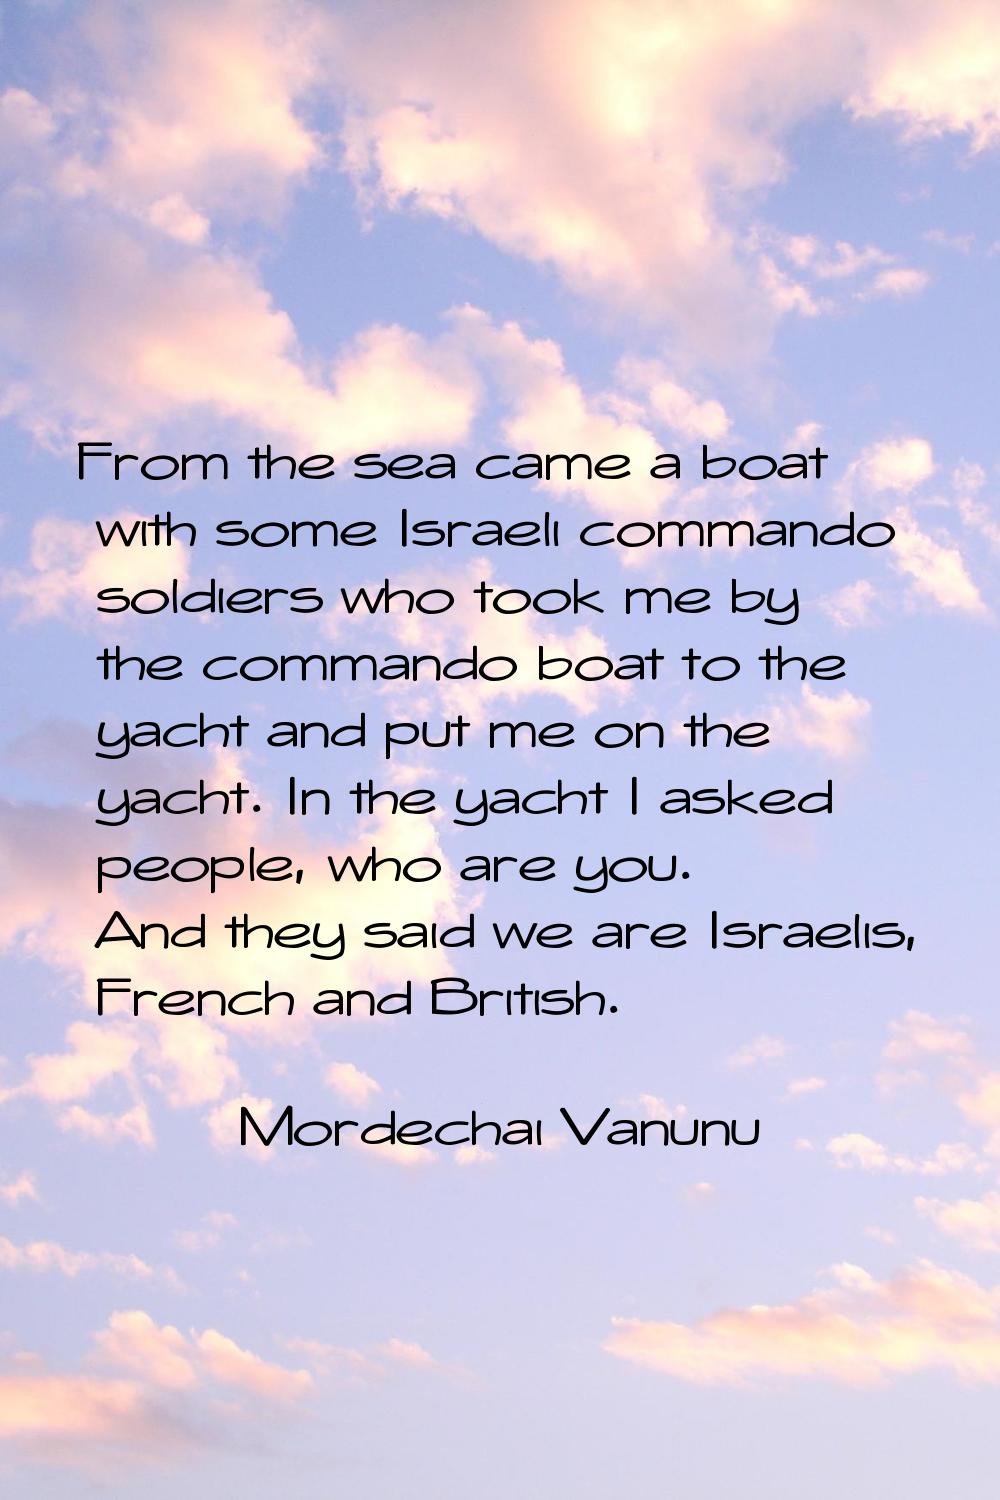 From the sea came a boat with some Israeli commando soldiers who took me by the commando boat to th